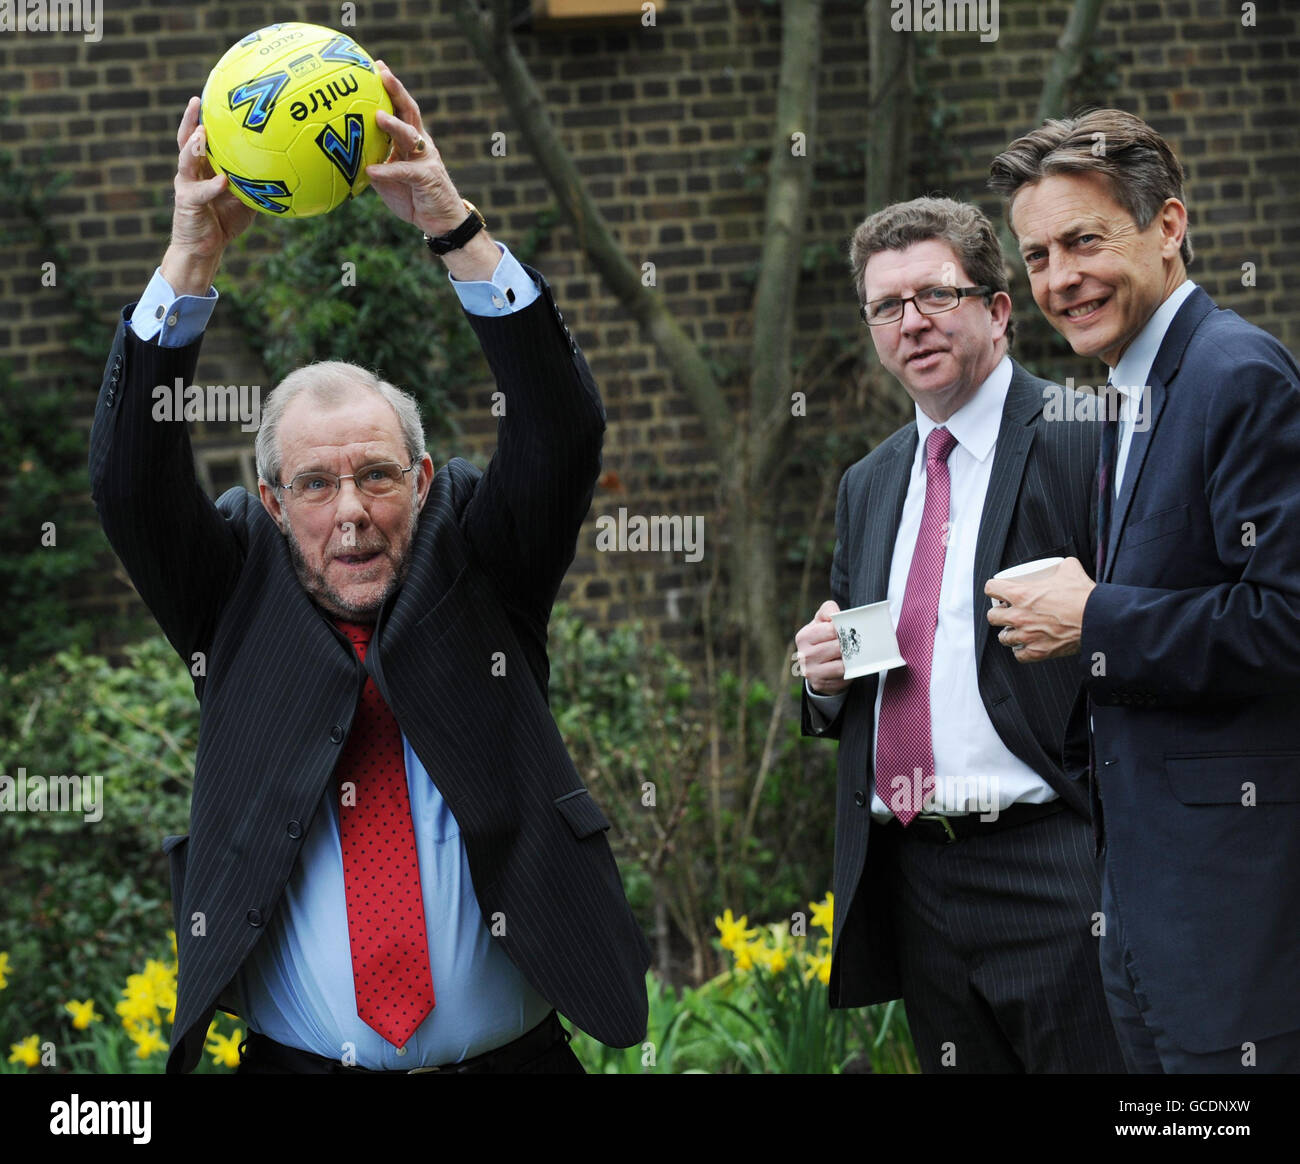 RE-TRANSMISSION AMENDING THE SPELLING OF GERRY SUTCLIFFE. 2018 World Cup bid Ambassador Richard Caborn MP throws a football in the garden of 10 Downing Street, London, with Sports Minster Gerry Sutcliffe (centre) and Culture Minister Ben Bradshaw, where they and Prime Minister Gordon Brown signed a giant England shirt to show their support for the England world cup team this year. Stock Photo